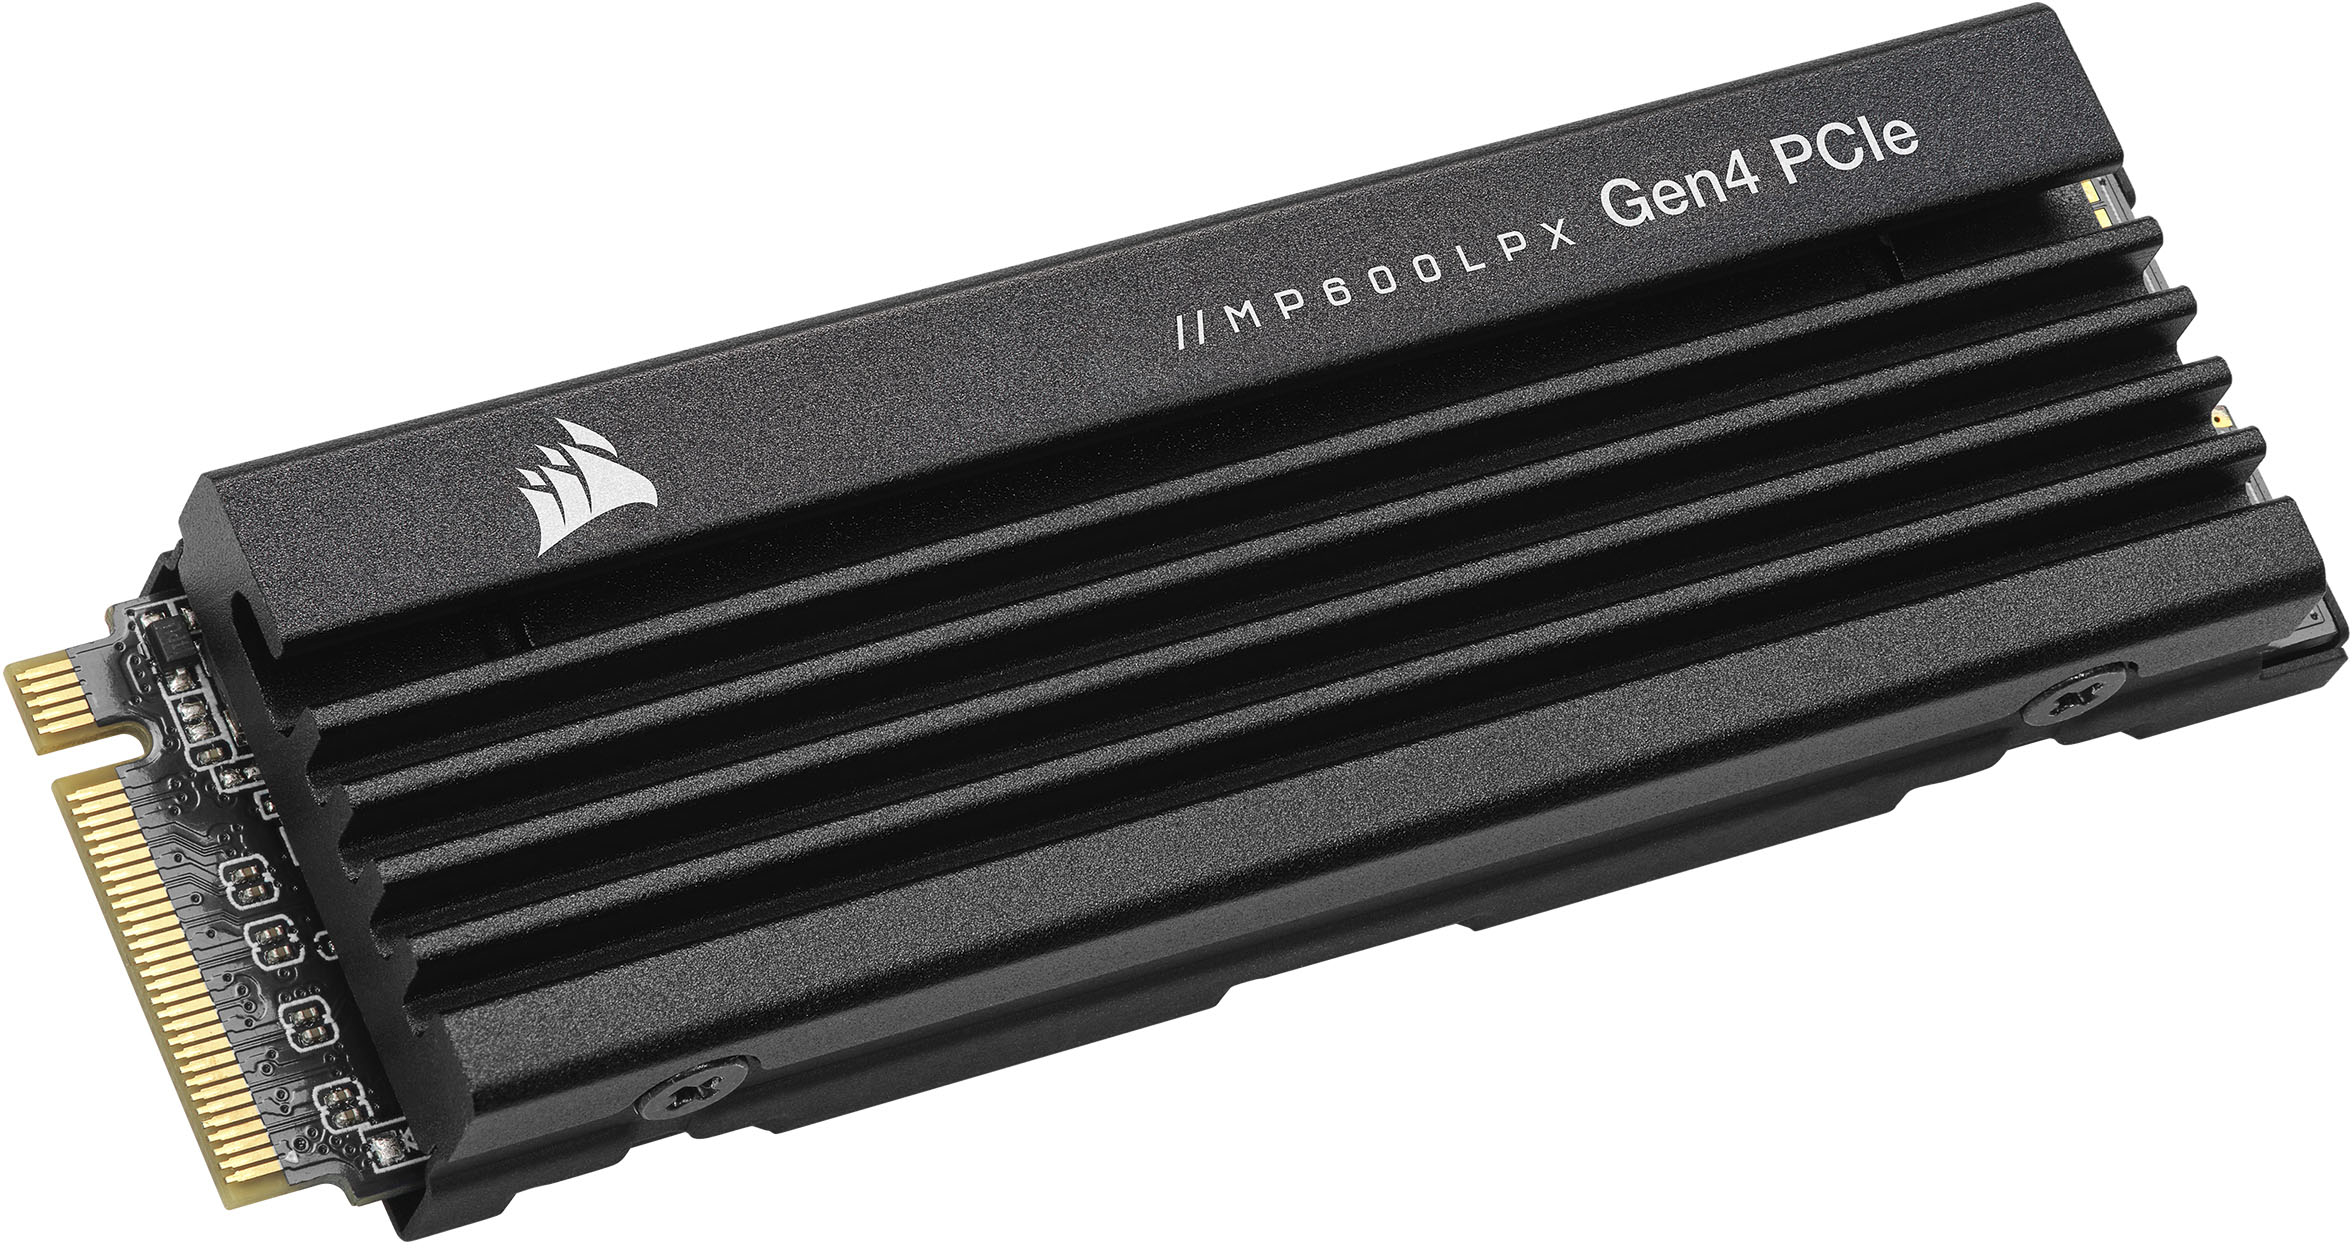 Corsair MP600, Come On Down! You're The Next Contestant On The PCIe 4.0  NVMe Show! - PC Perspective